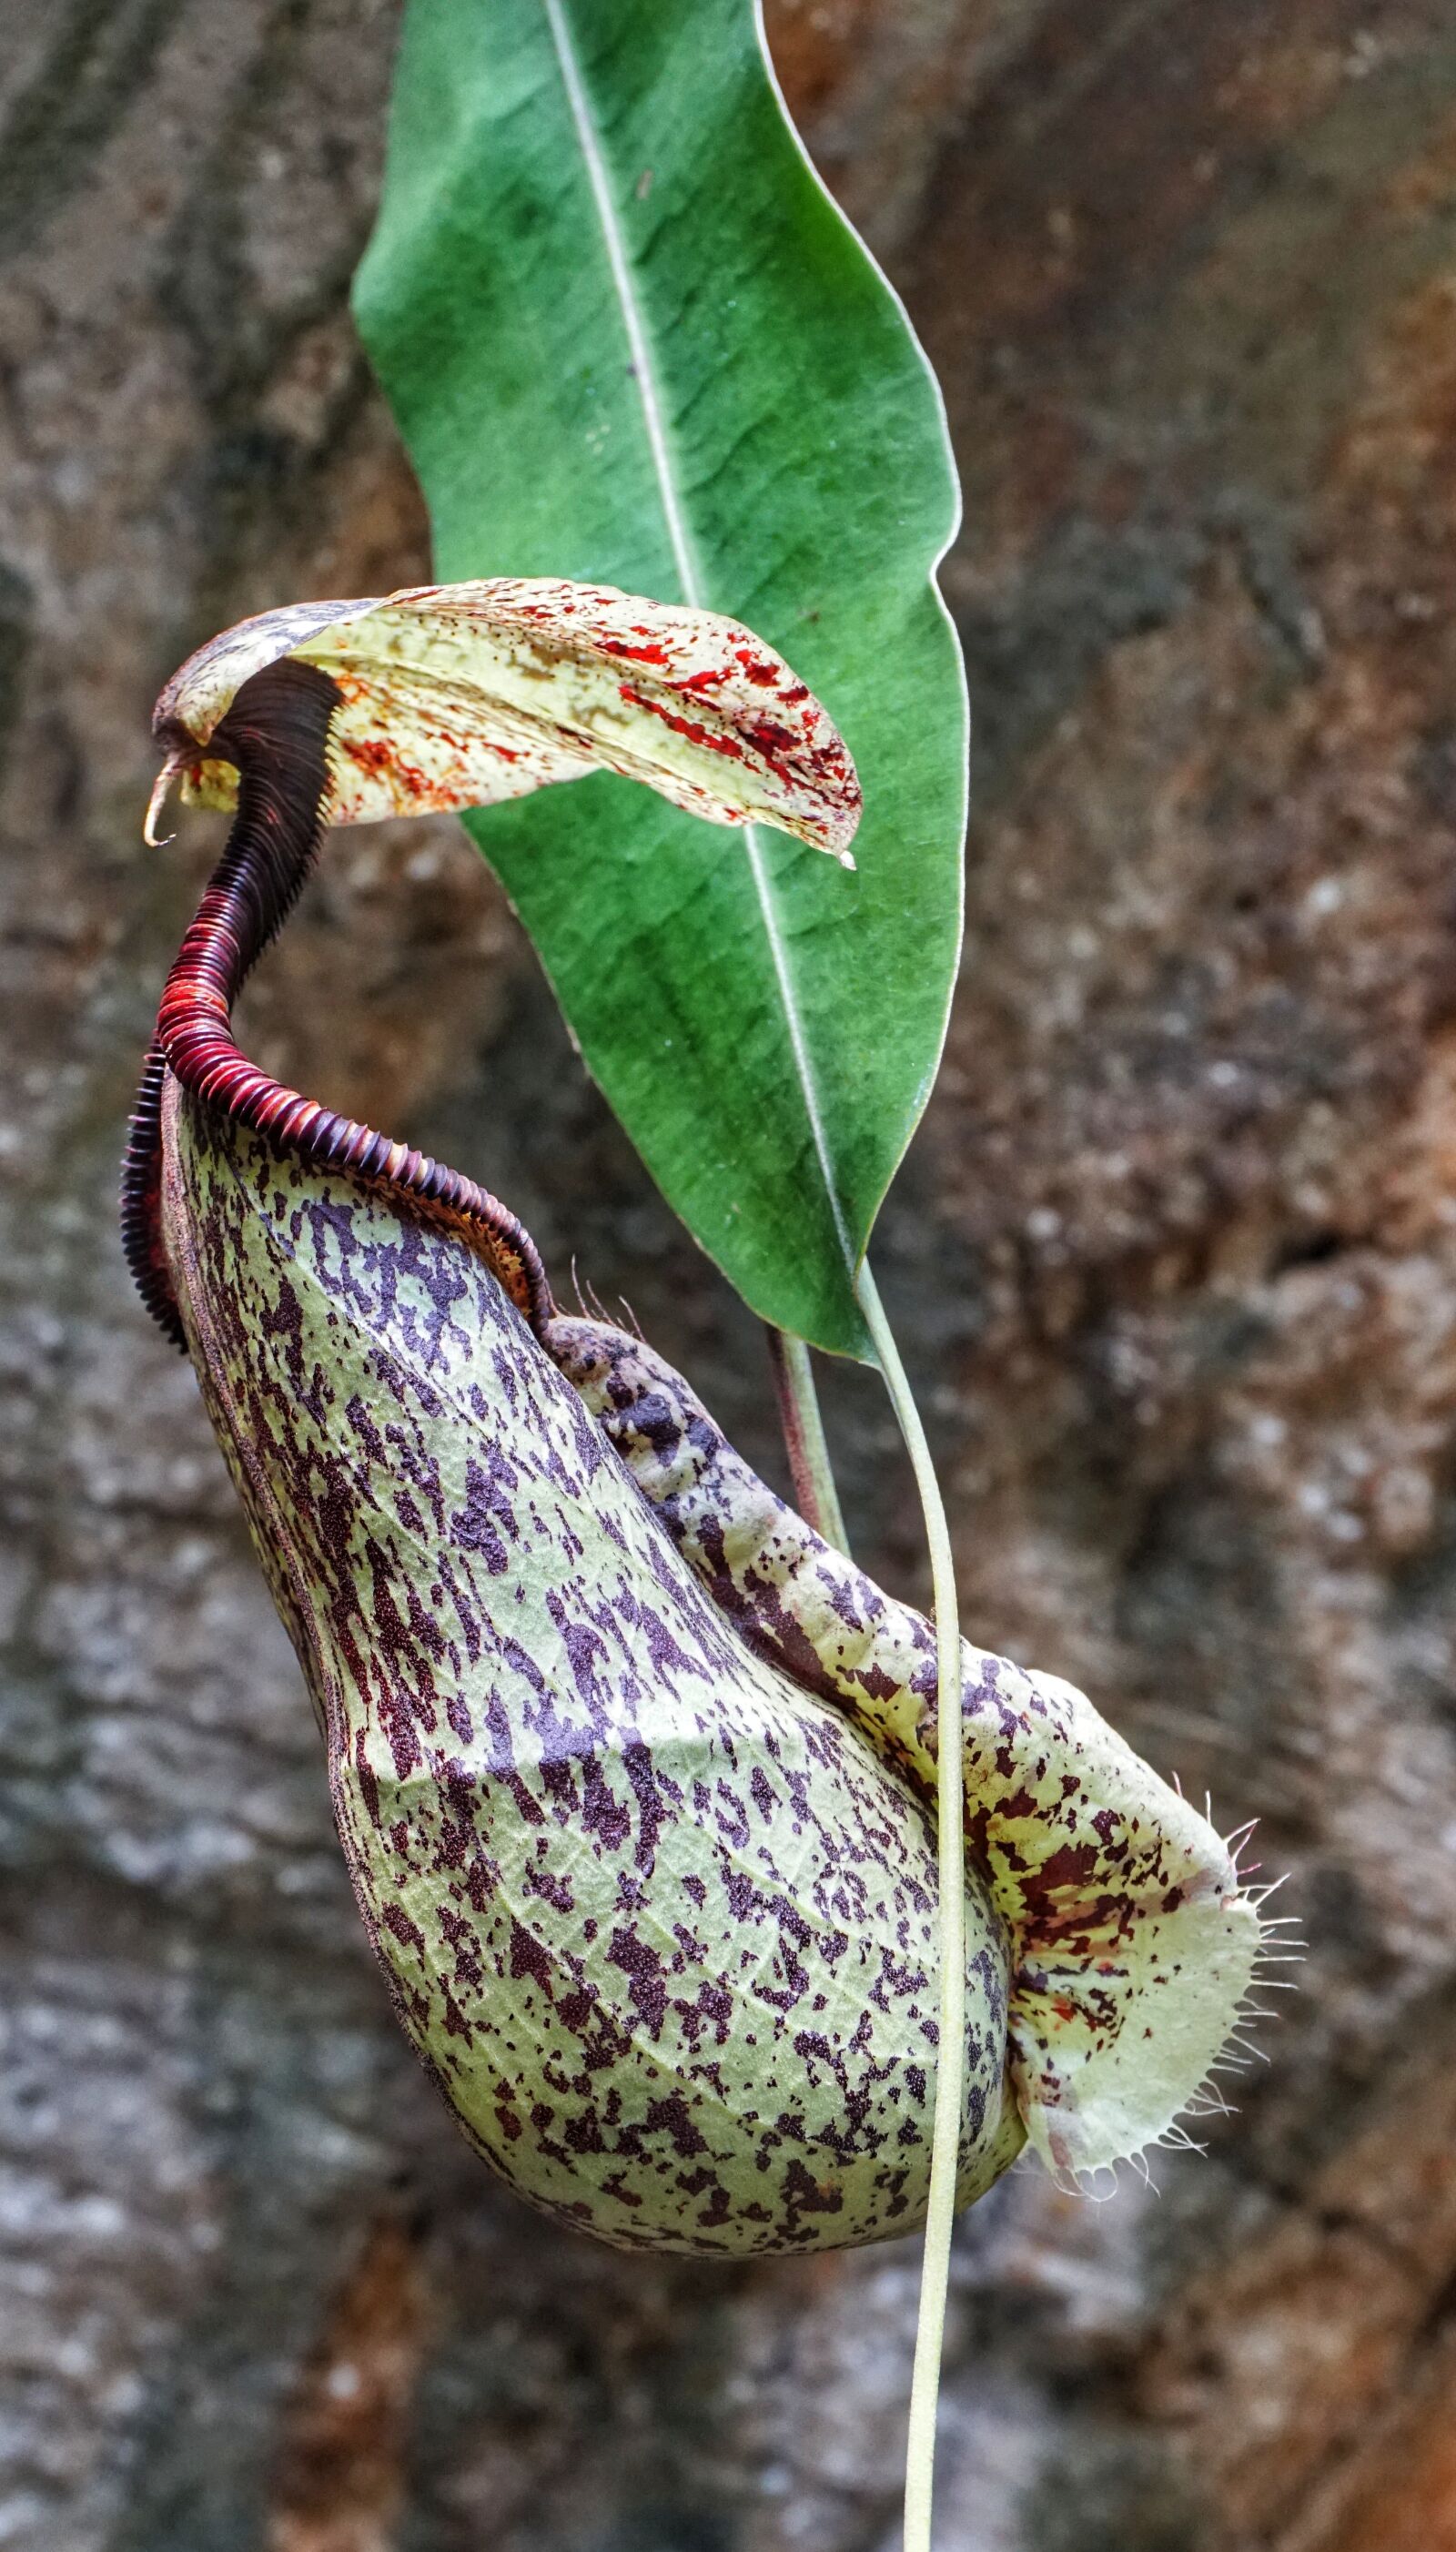 Sony a6300 sample photo. Tropical pitcher plant, monkey photography